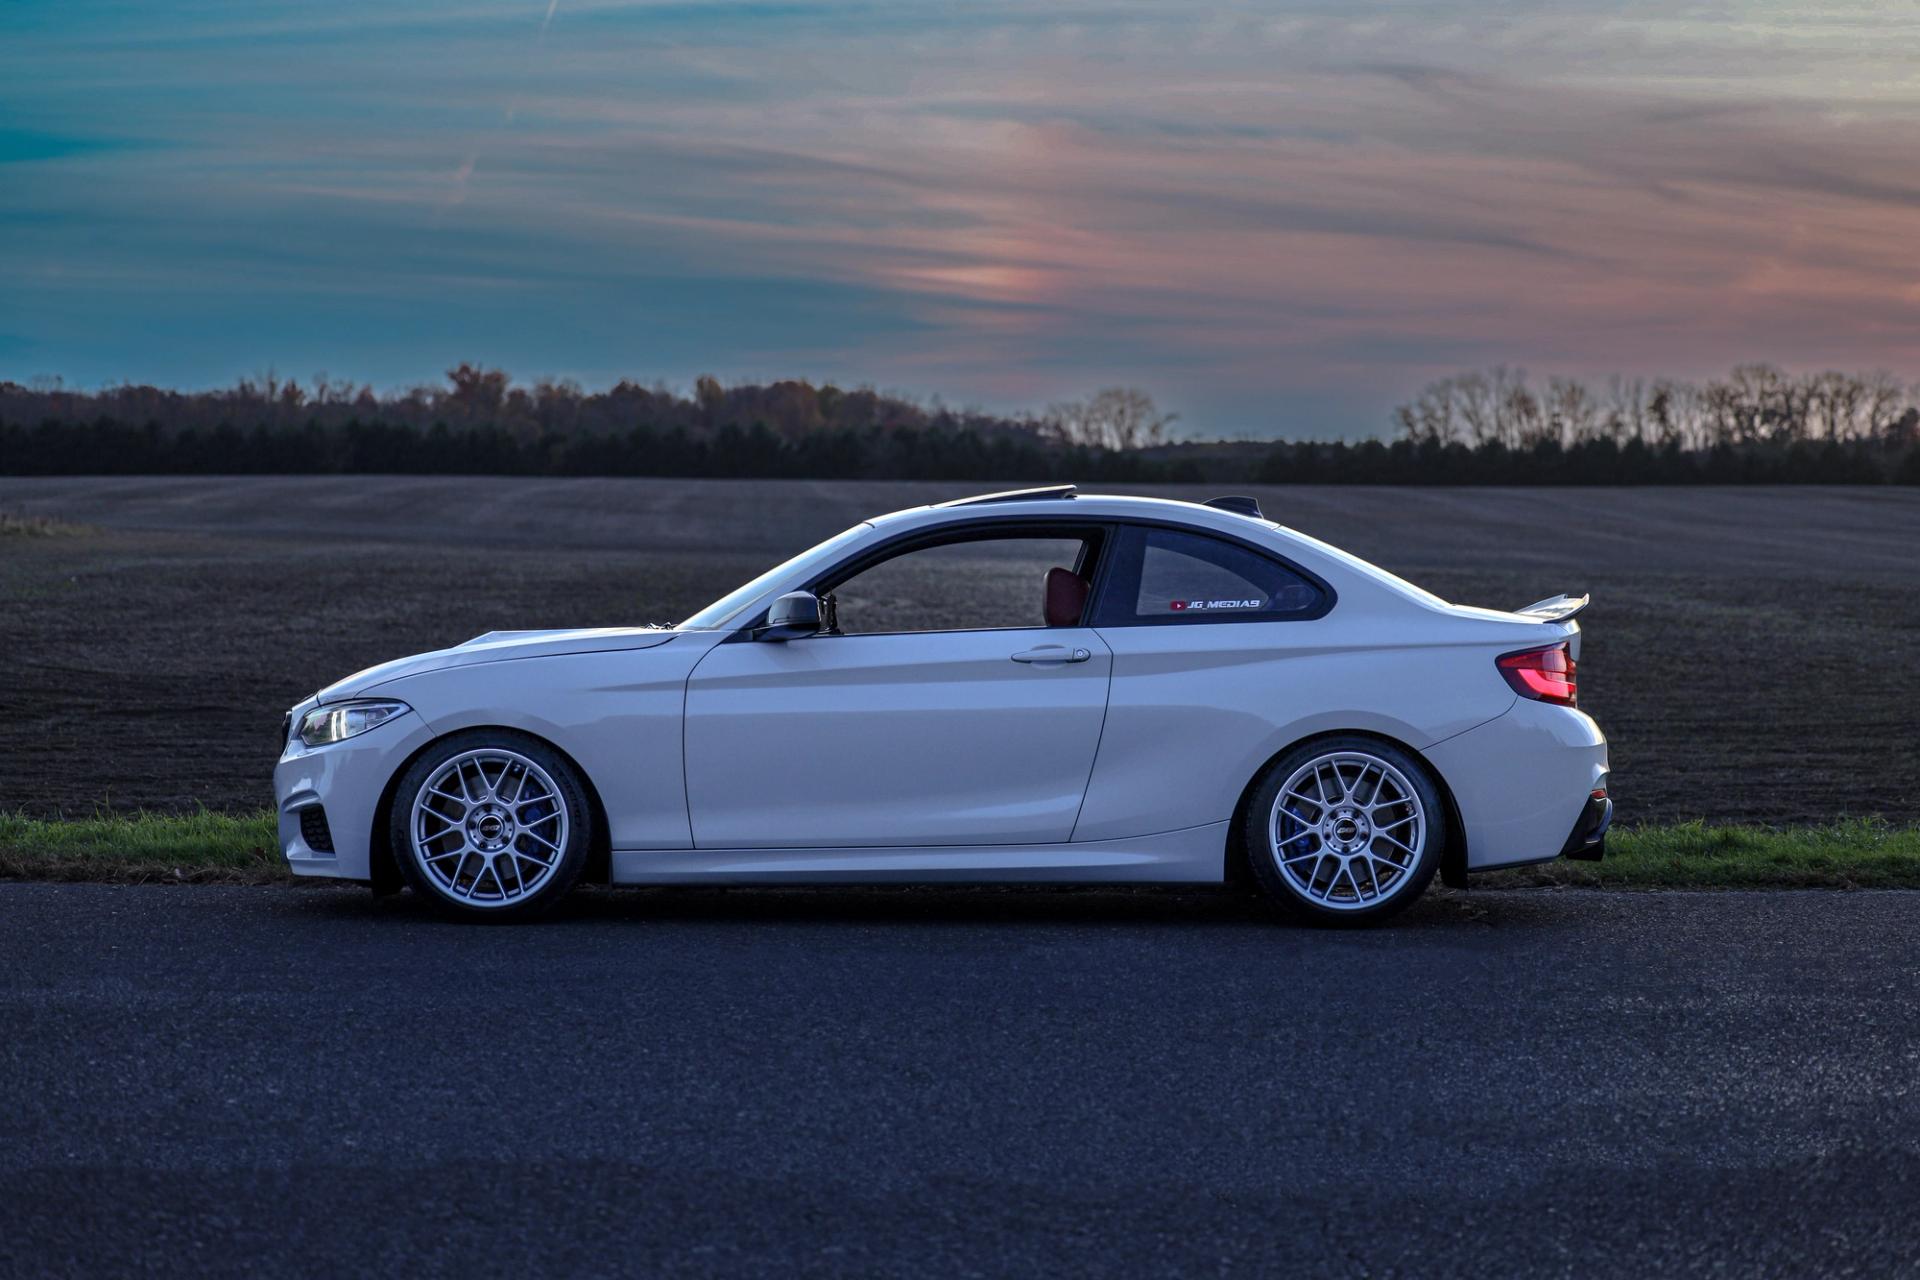 BMW F22 Coupe 2 Series with 18" ARC-8 in Hyper Silver